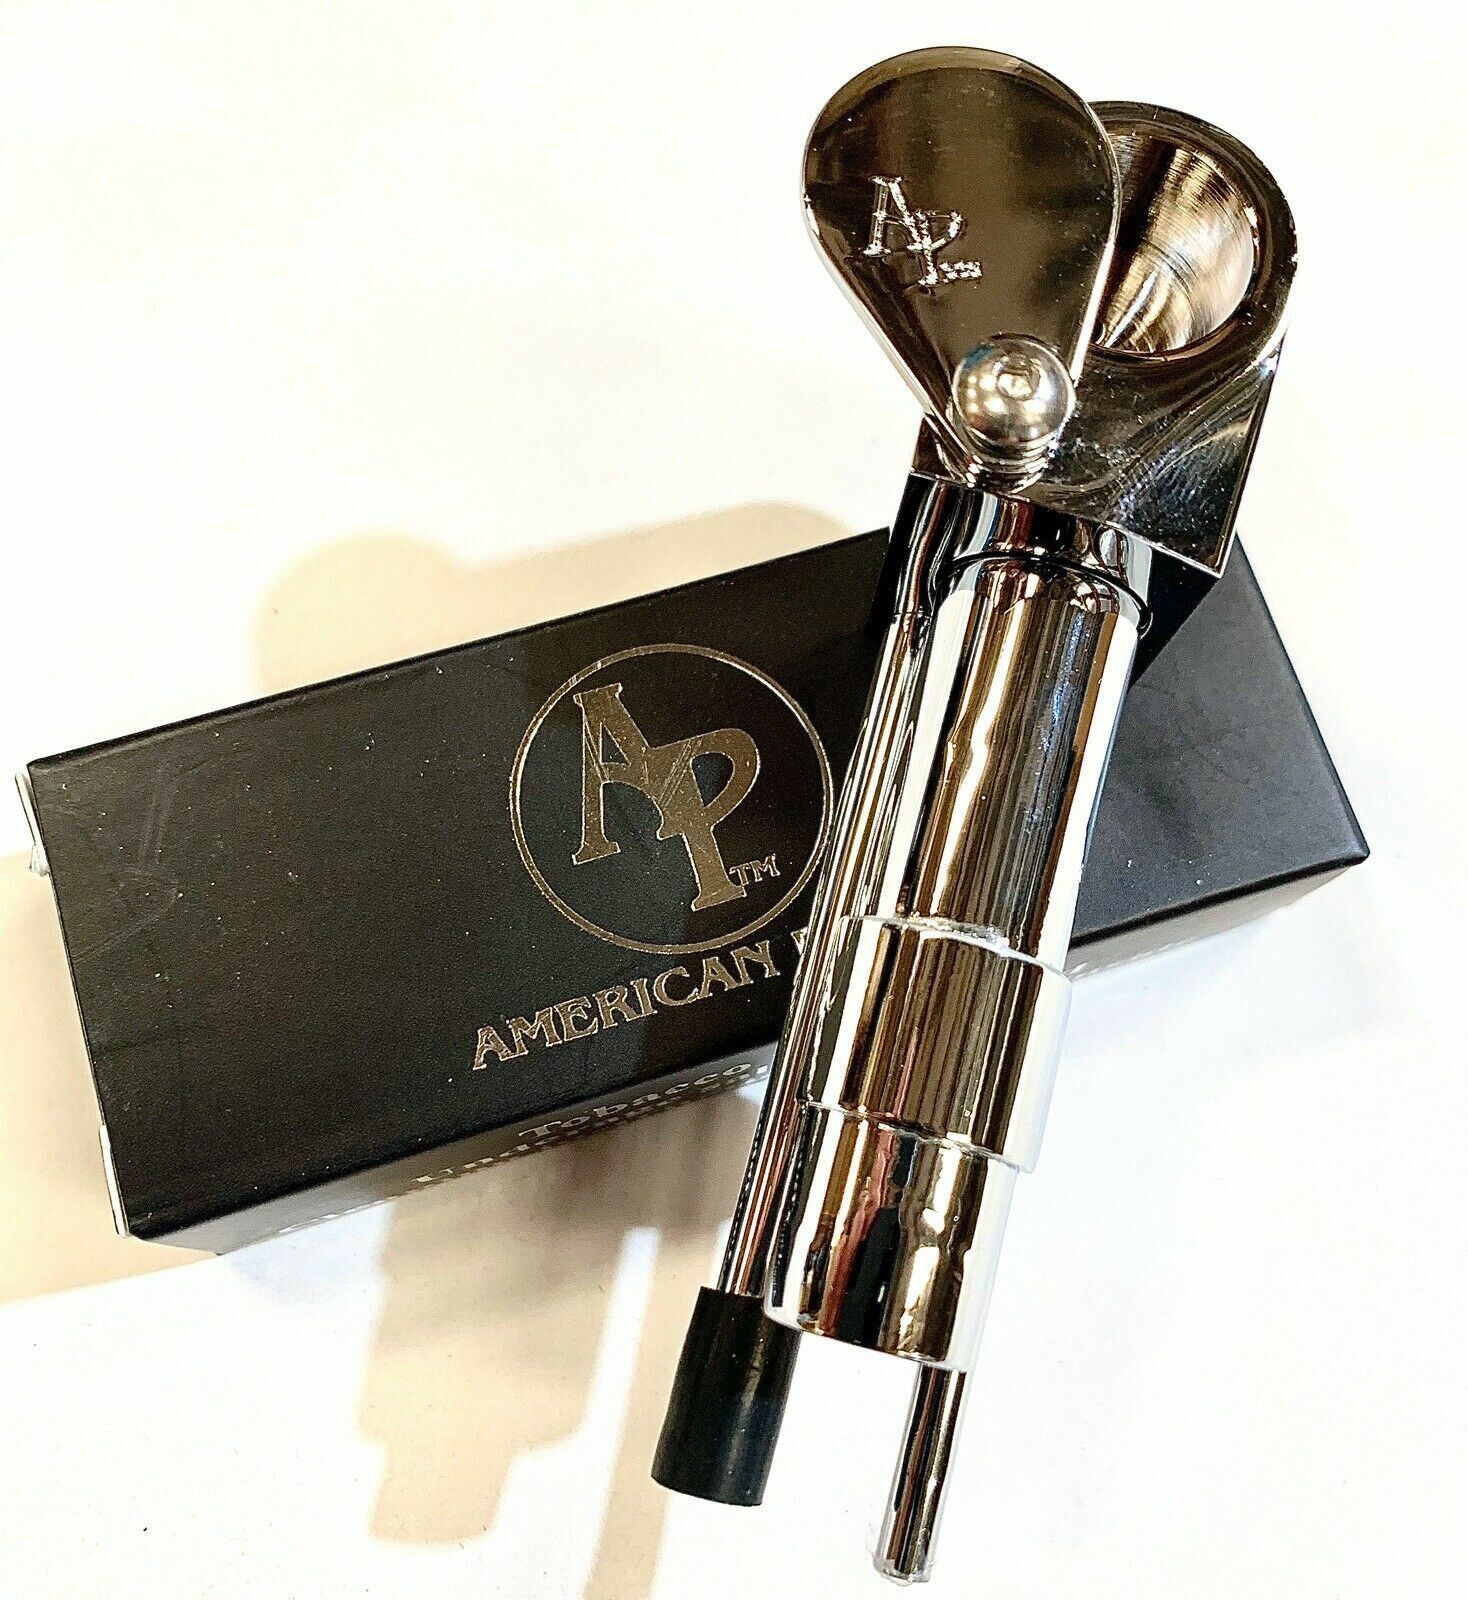 ORIGINAL AMERICANPIPES(tm)TRAVELLER(tm)DELUXE  TYPE CHROME PLATED  SOLID  BRASS